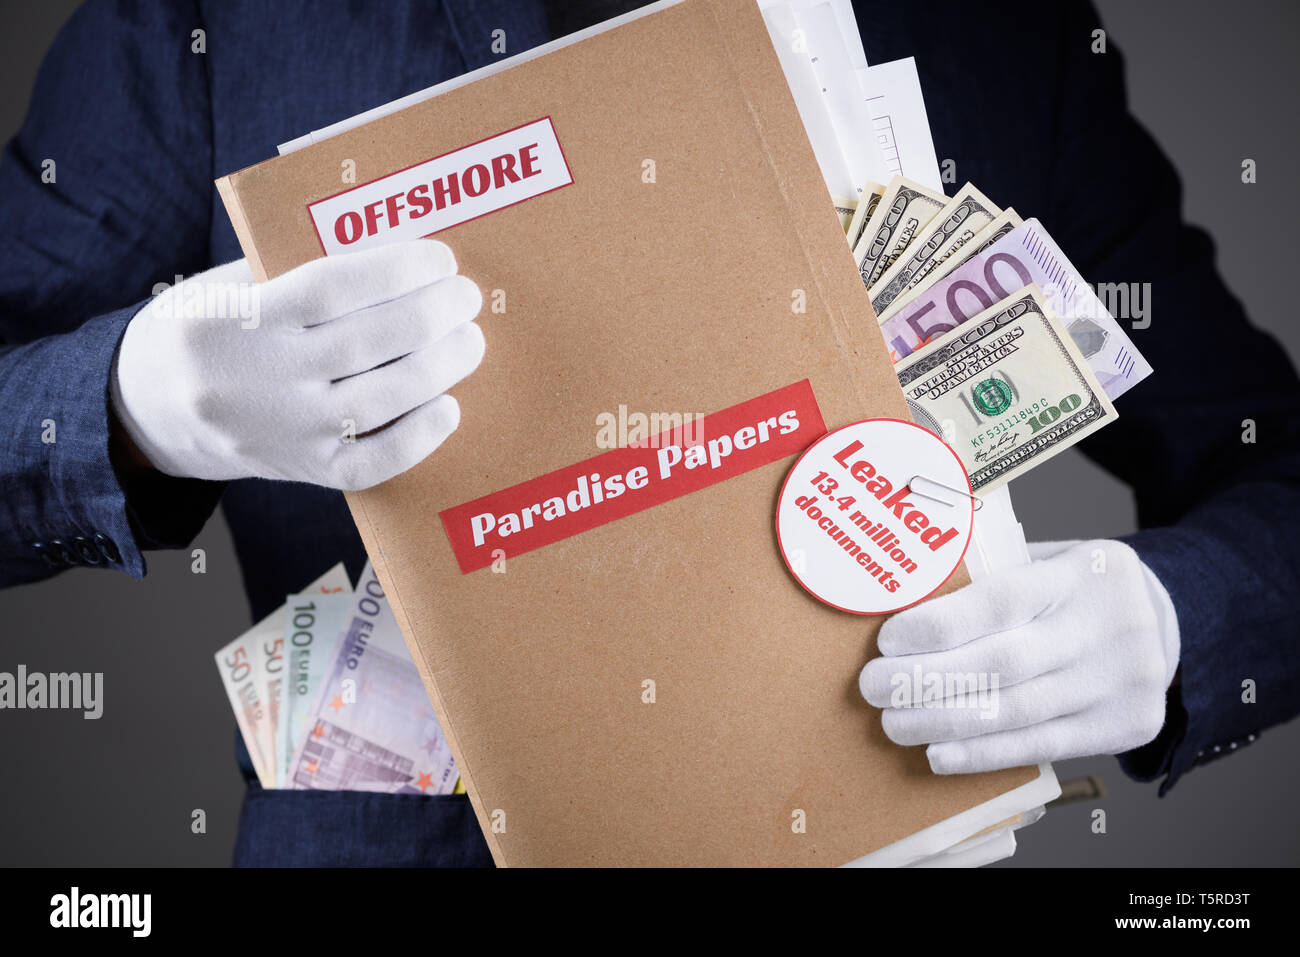 Man in suit with euro and dollar currency in pokets and in white gloves hold paper folder with Paradise Papers and Offshore label with documents insid Stock Photo